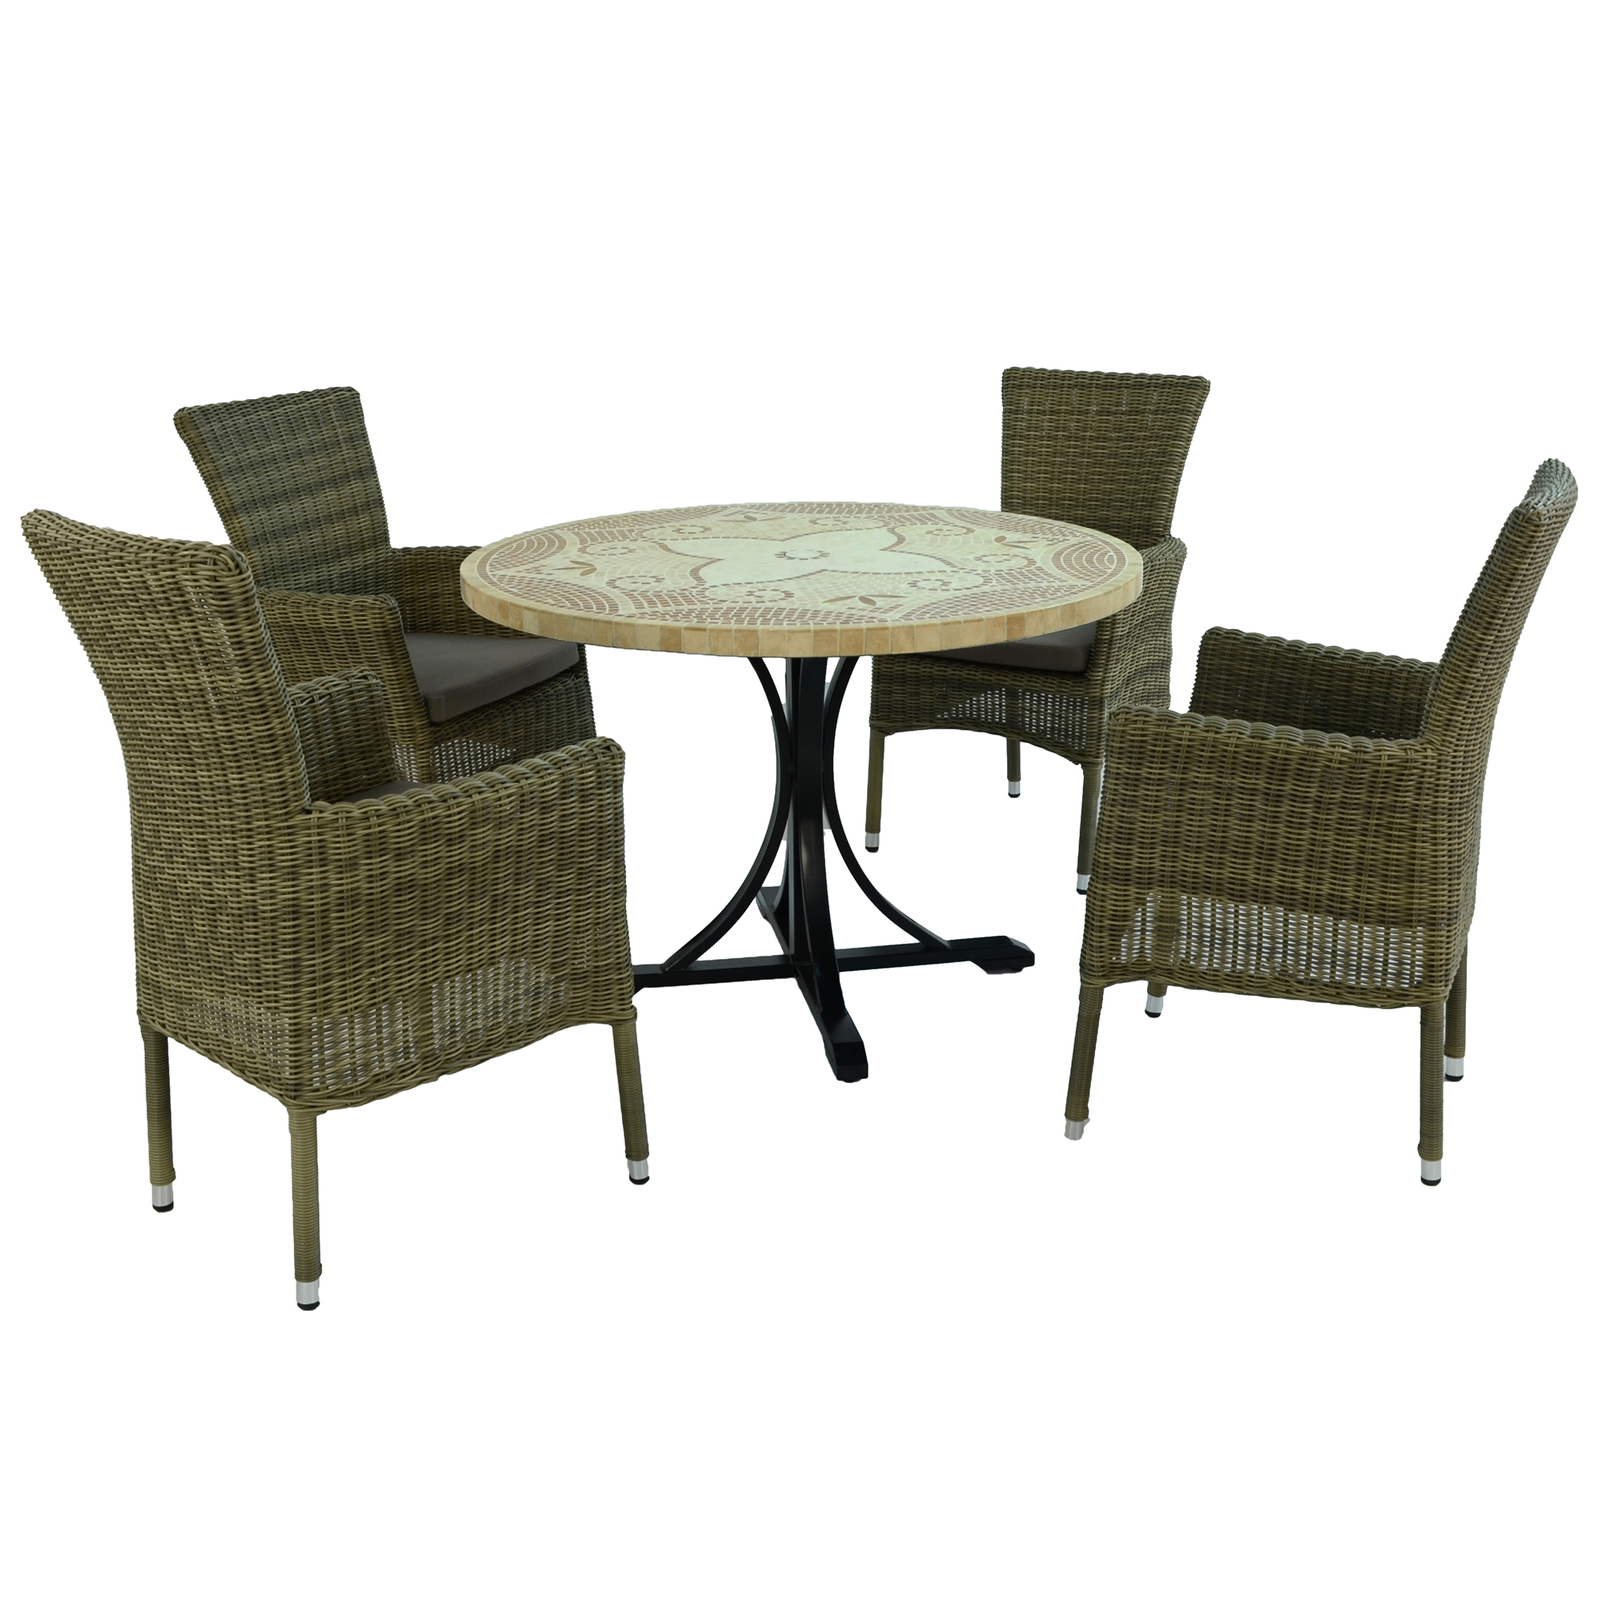 Byron Manor Provence Mosaic Stone Garden Dining Table With 4 Dorchester Wicker Chairs Dining Sets Byron Manor Default Title  